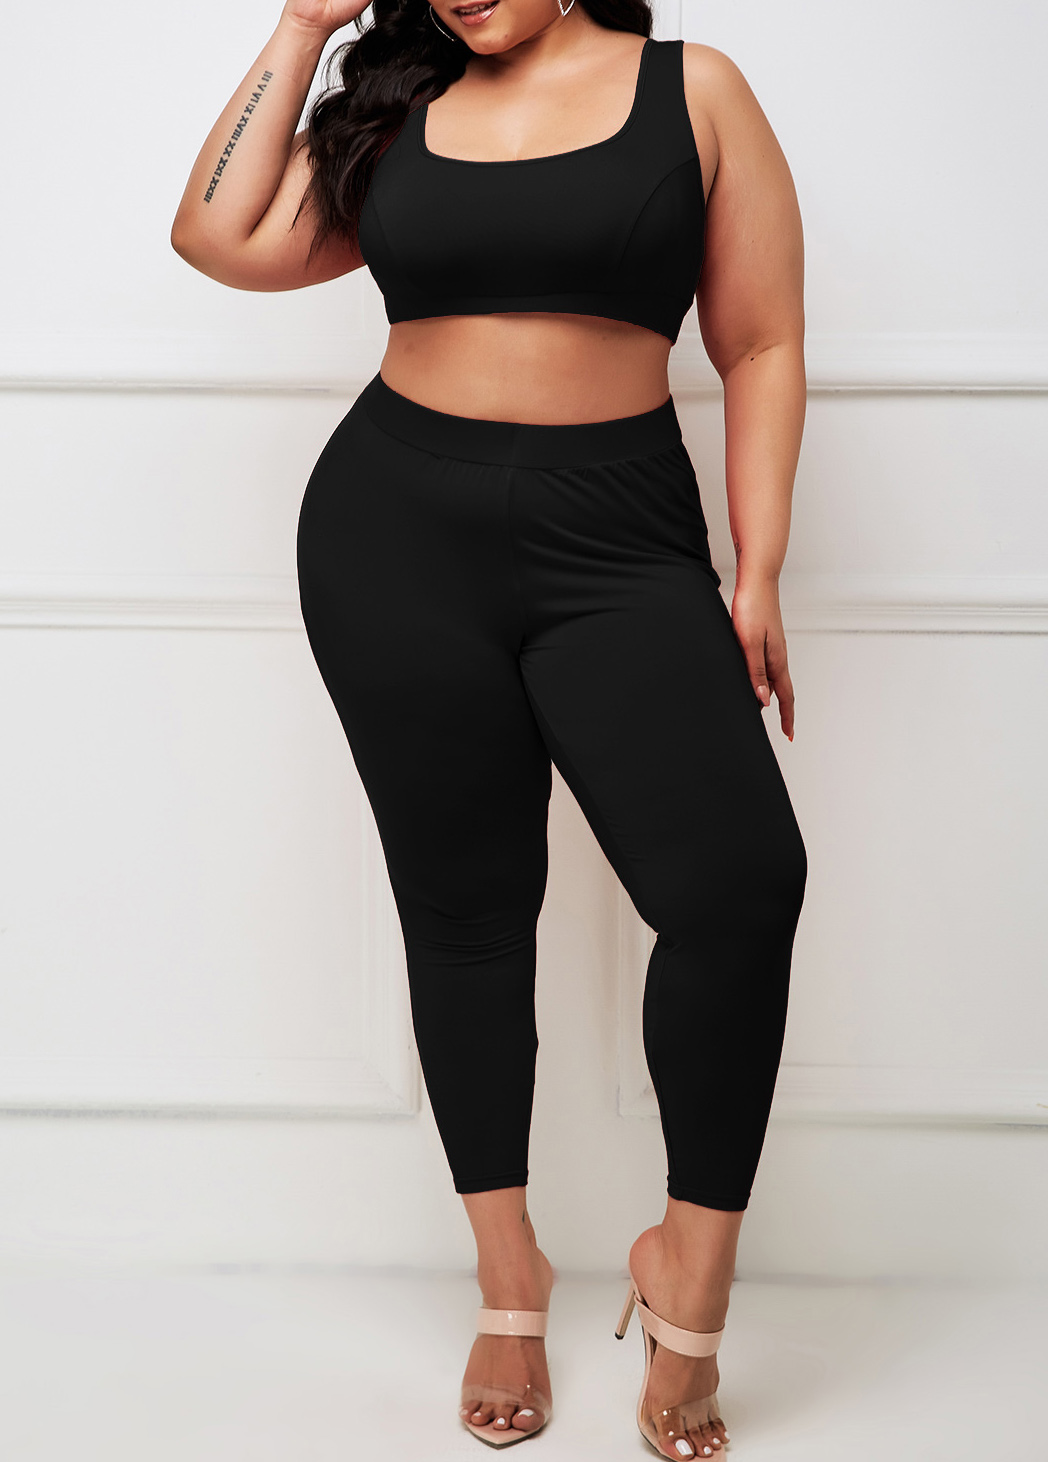 Wide Strap Plus Size Black High Waisted Sweatsuit